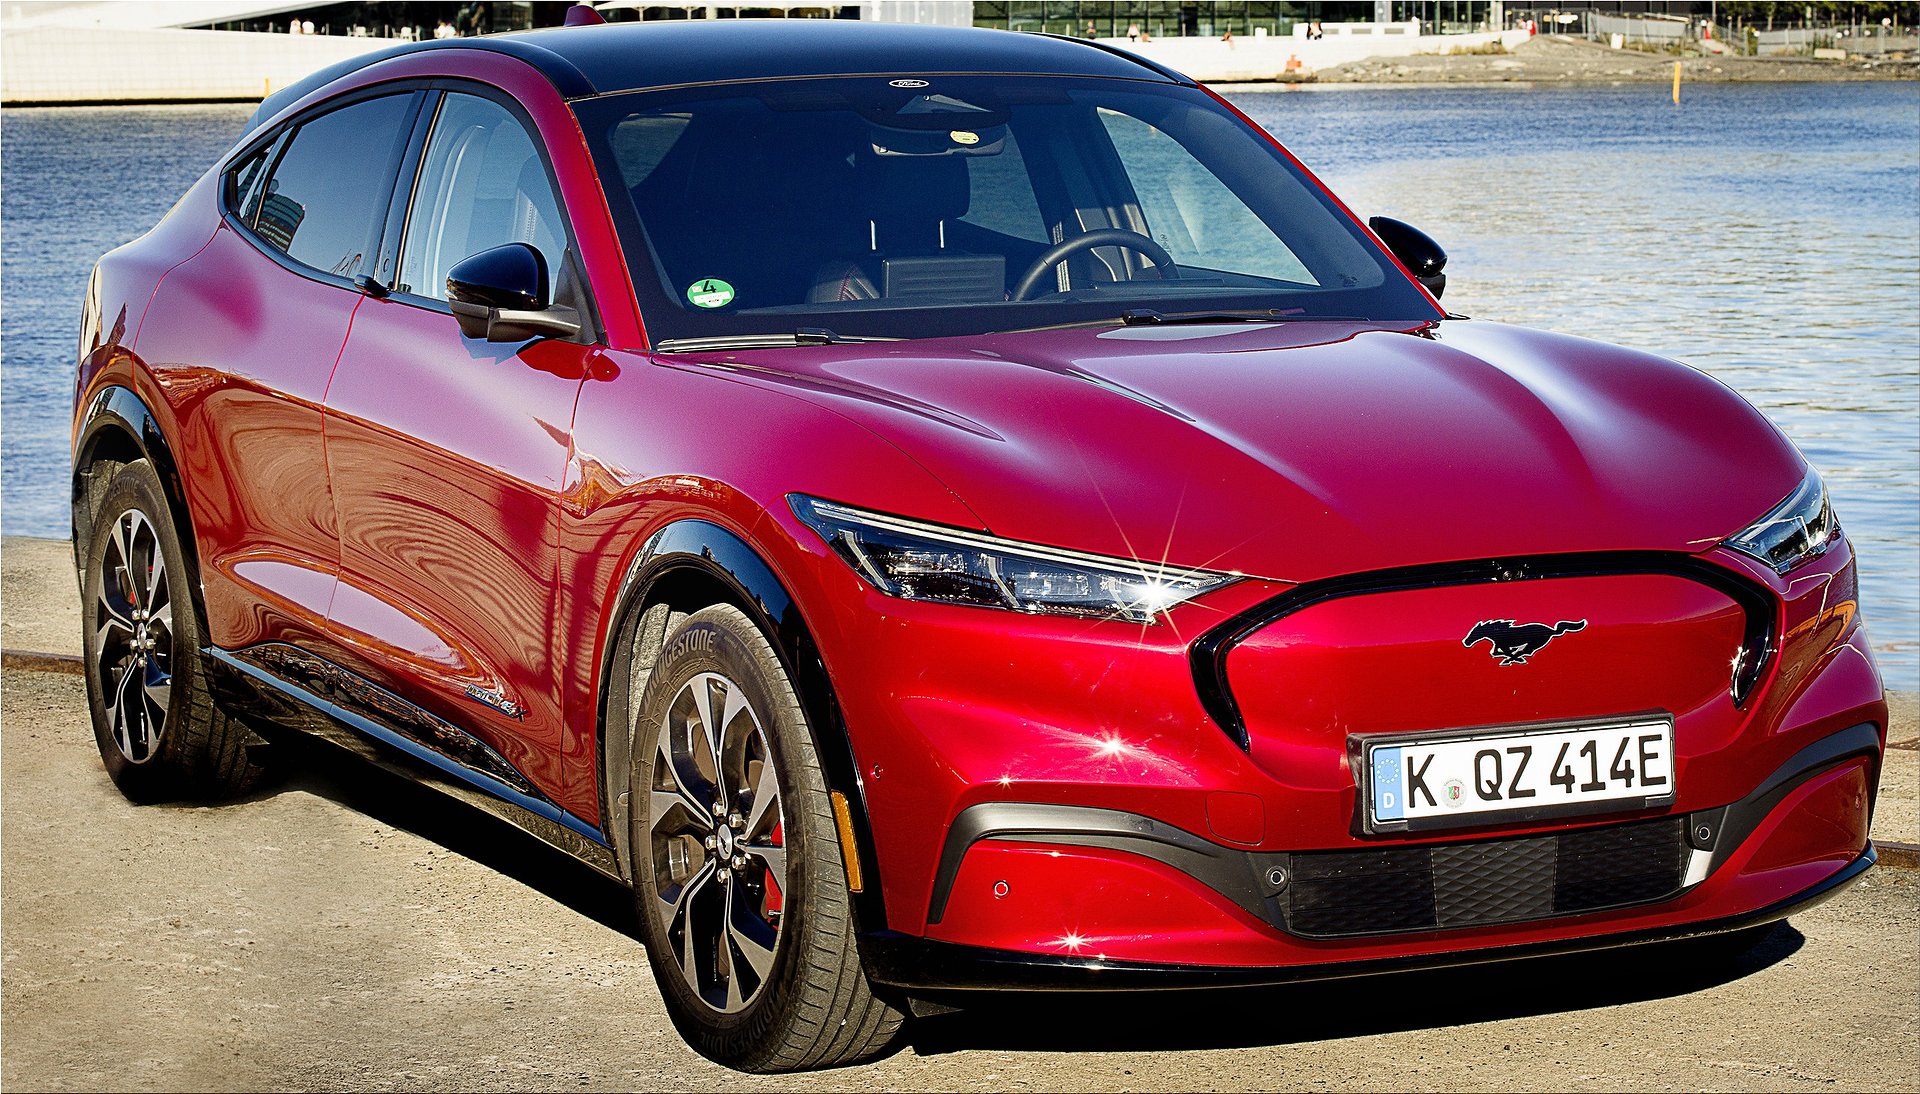 Ford-Mustang-Mach-E-electric-SUV-2021-s07.jpg